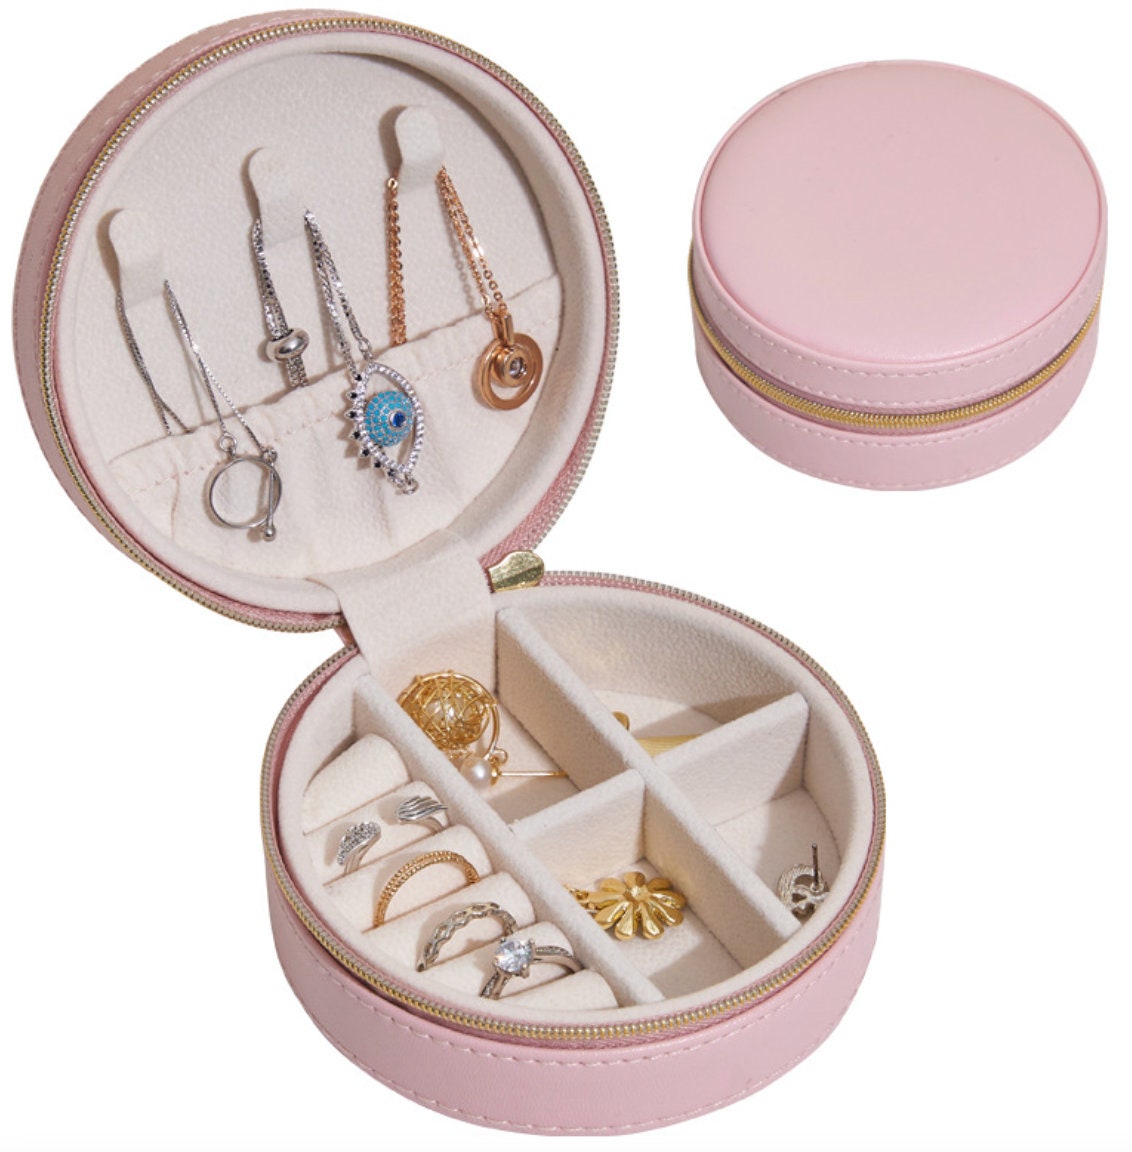 minimalist jewelry box interior in pink and gold color